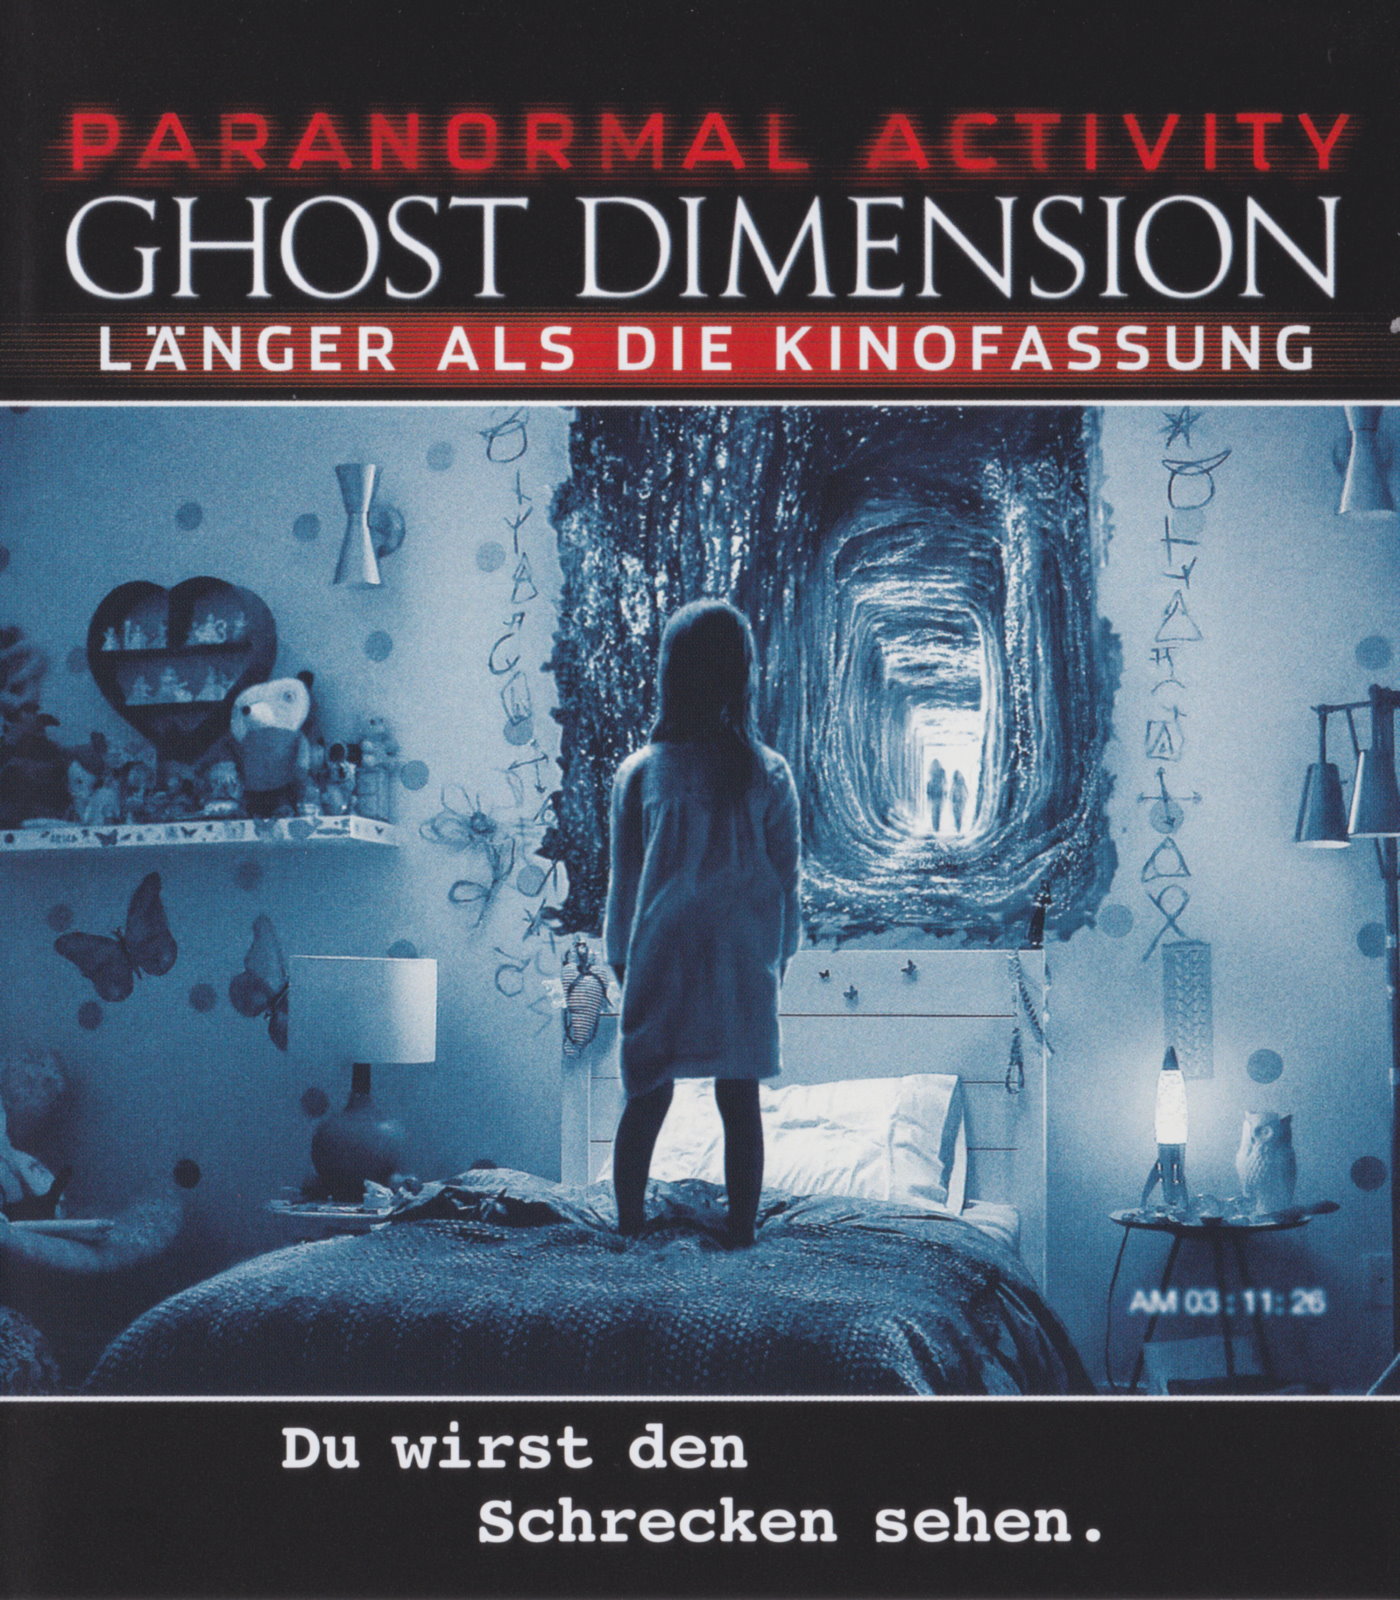 Cover - Paranormal Activity - Ghost Dimension.jpg